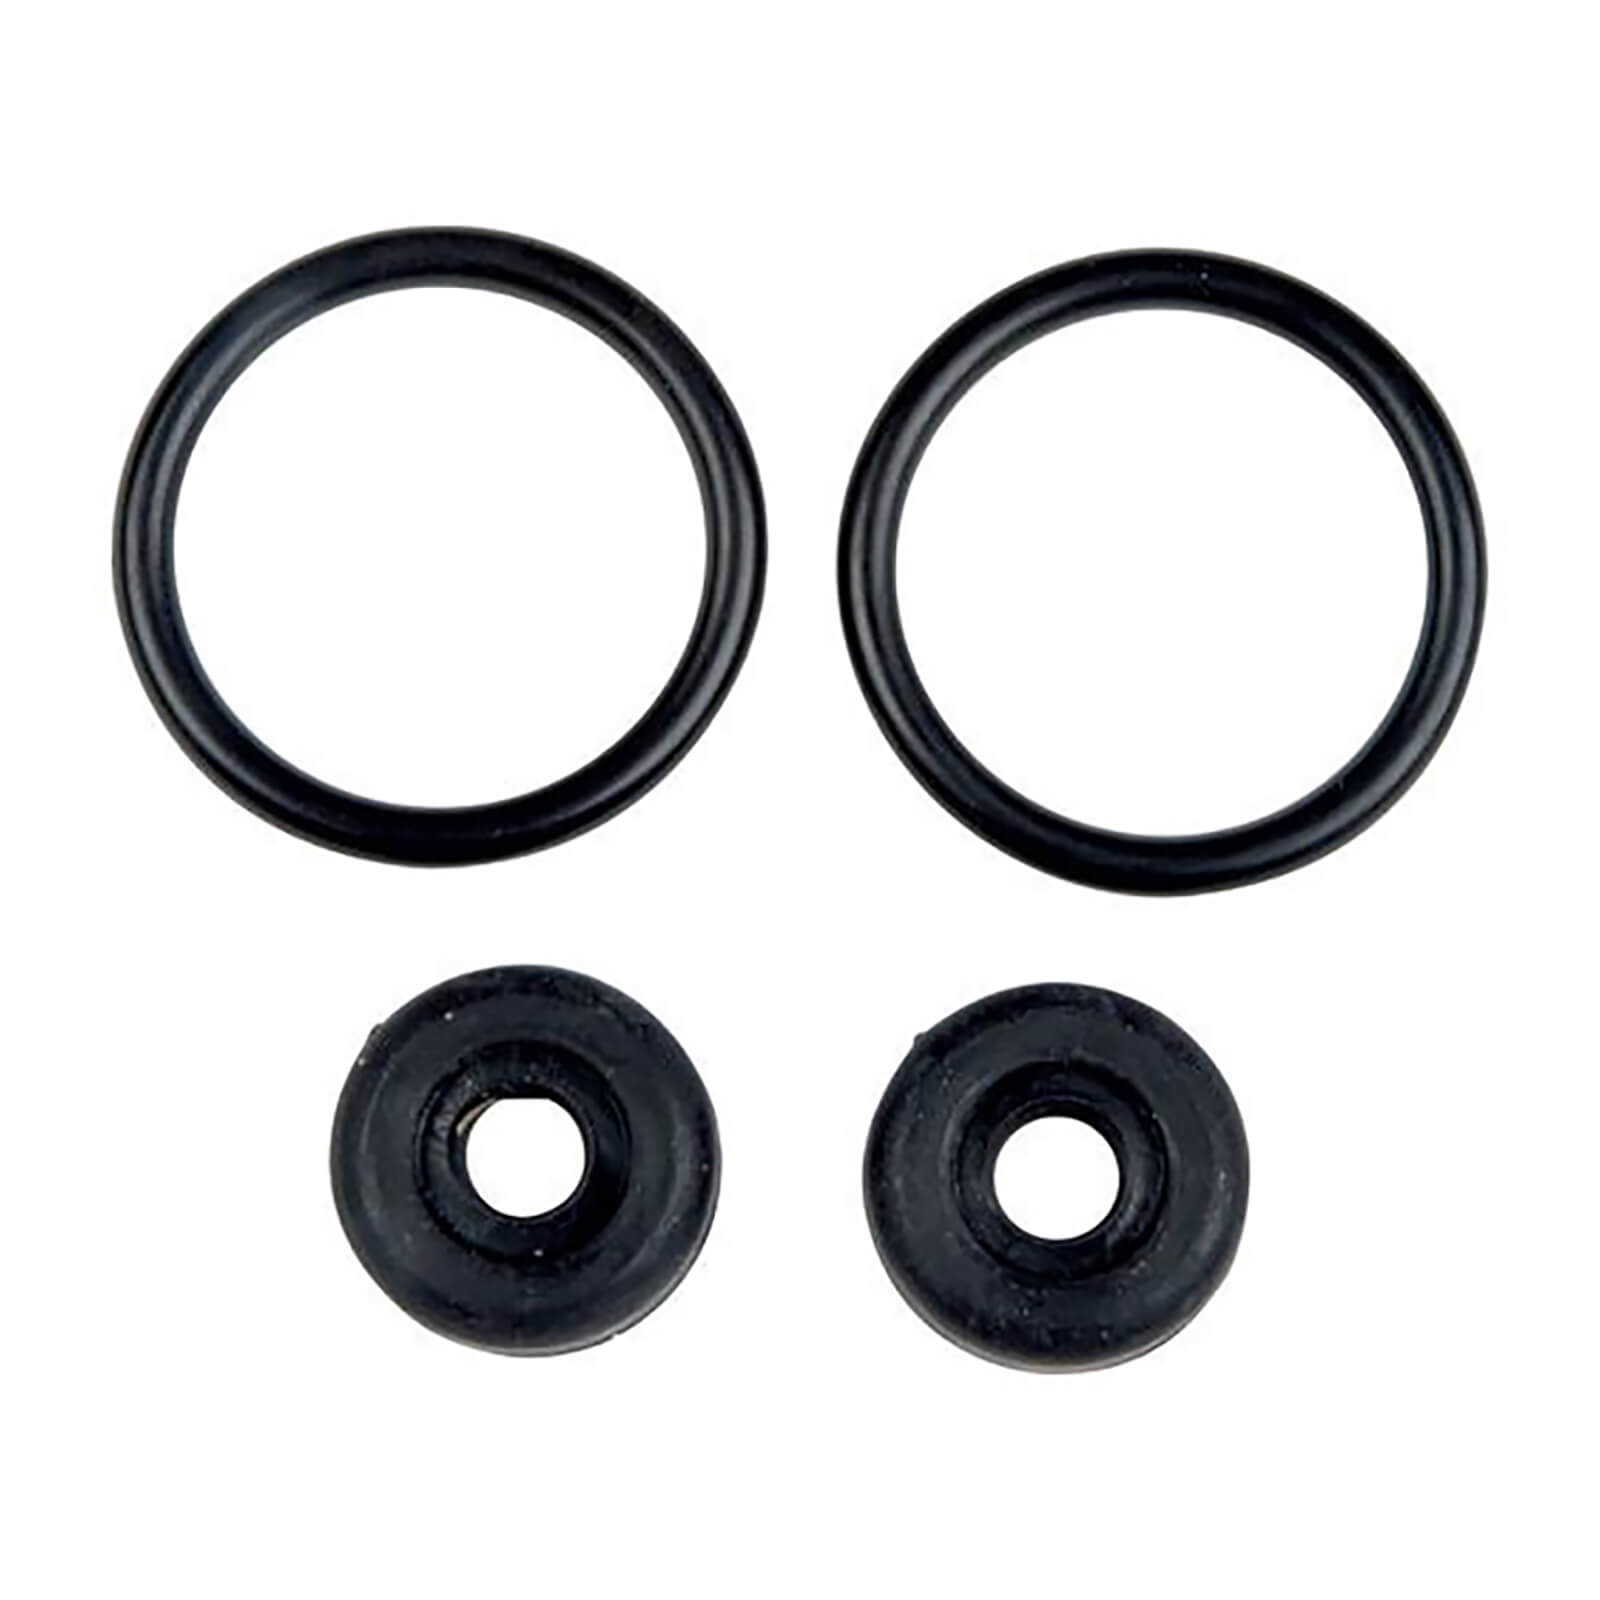 Photo of Delta Tap Washers - 13mm - 2 Pack